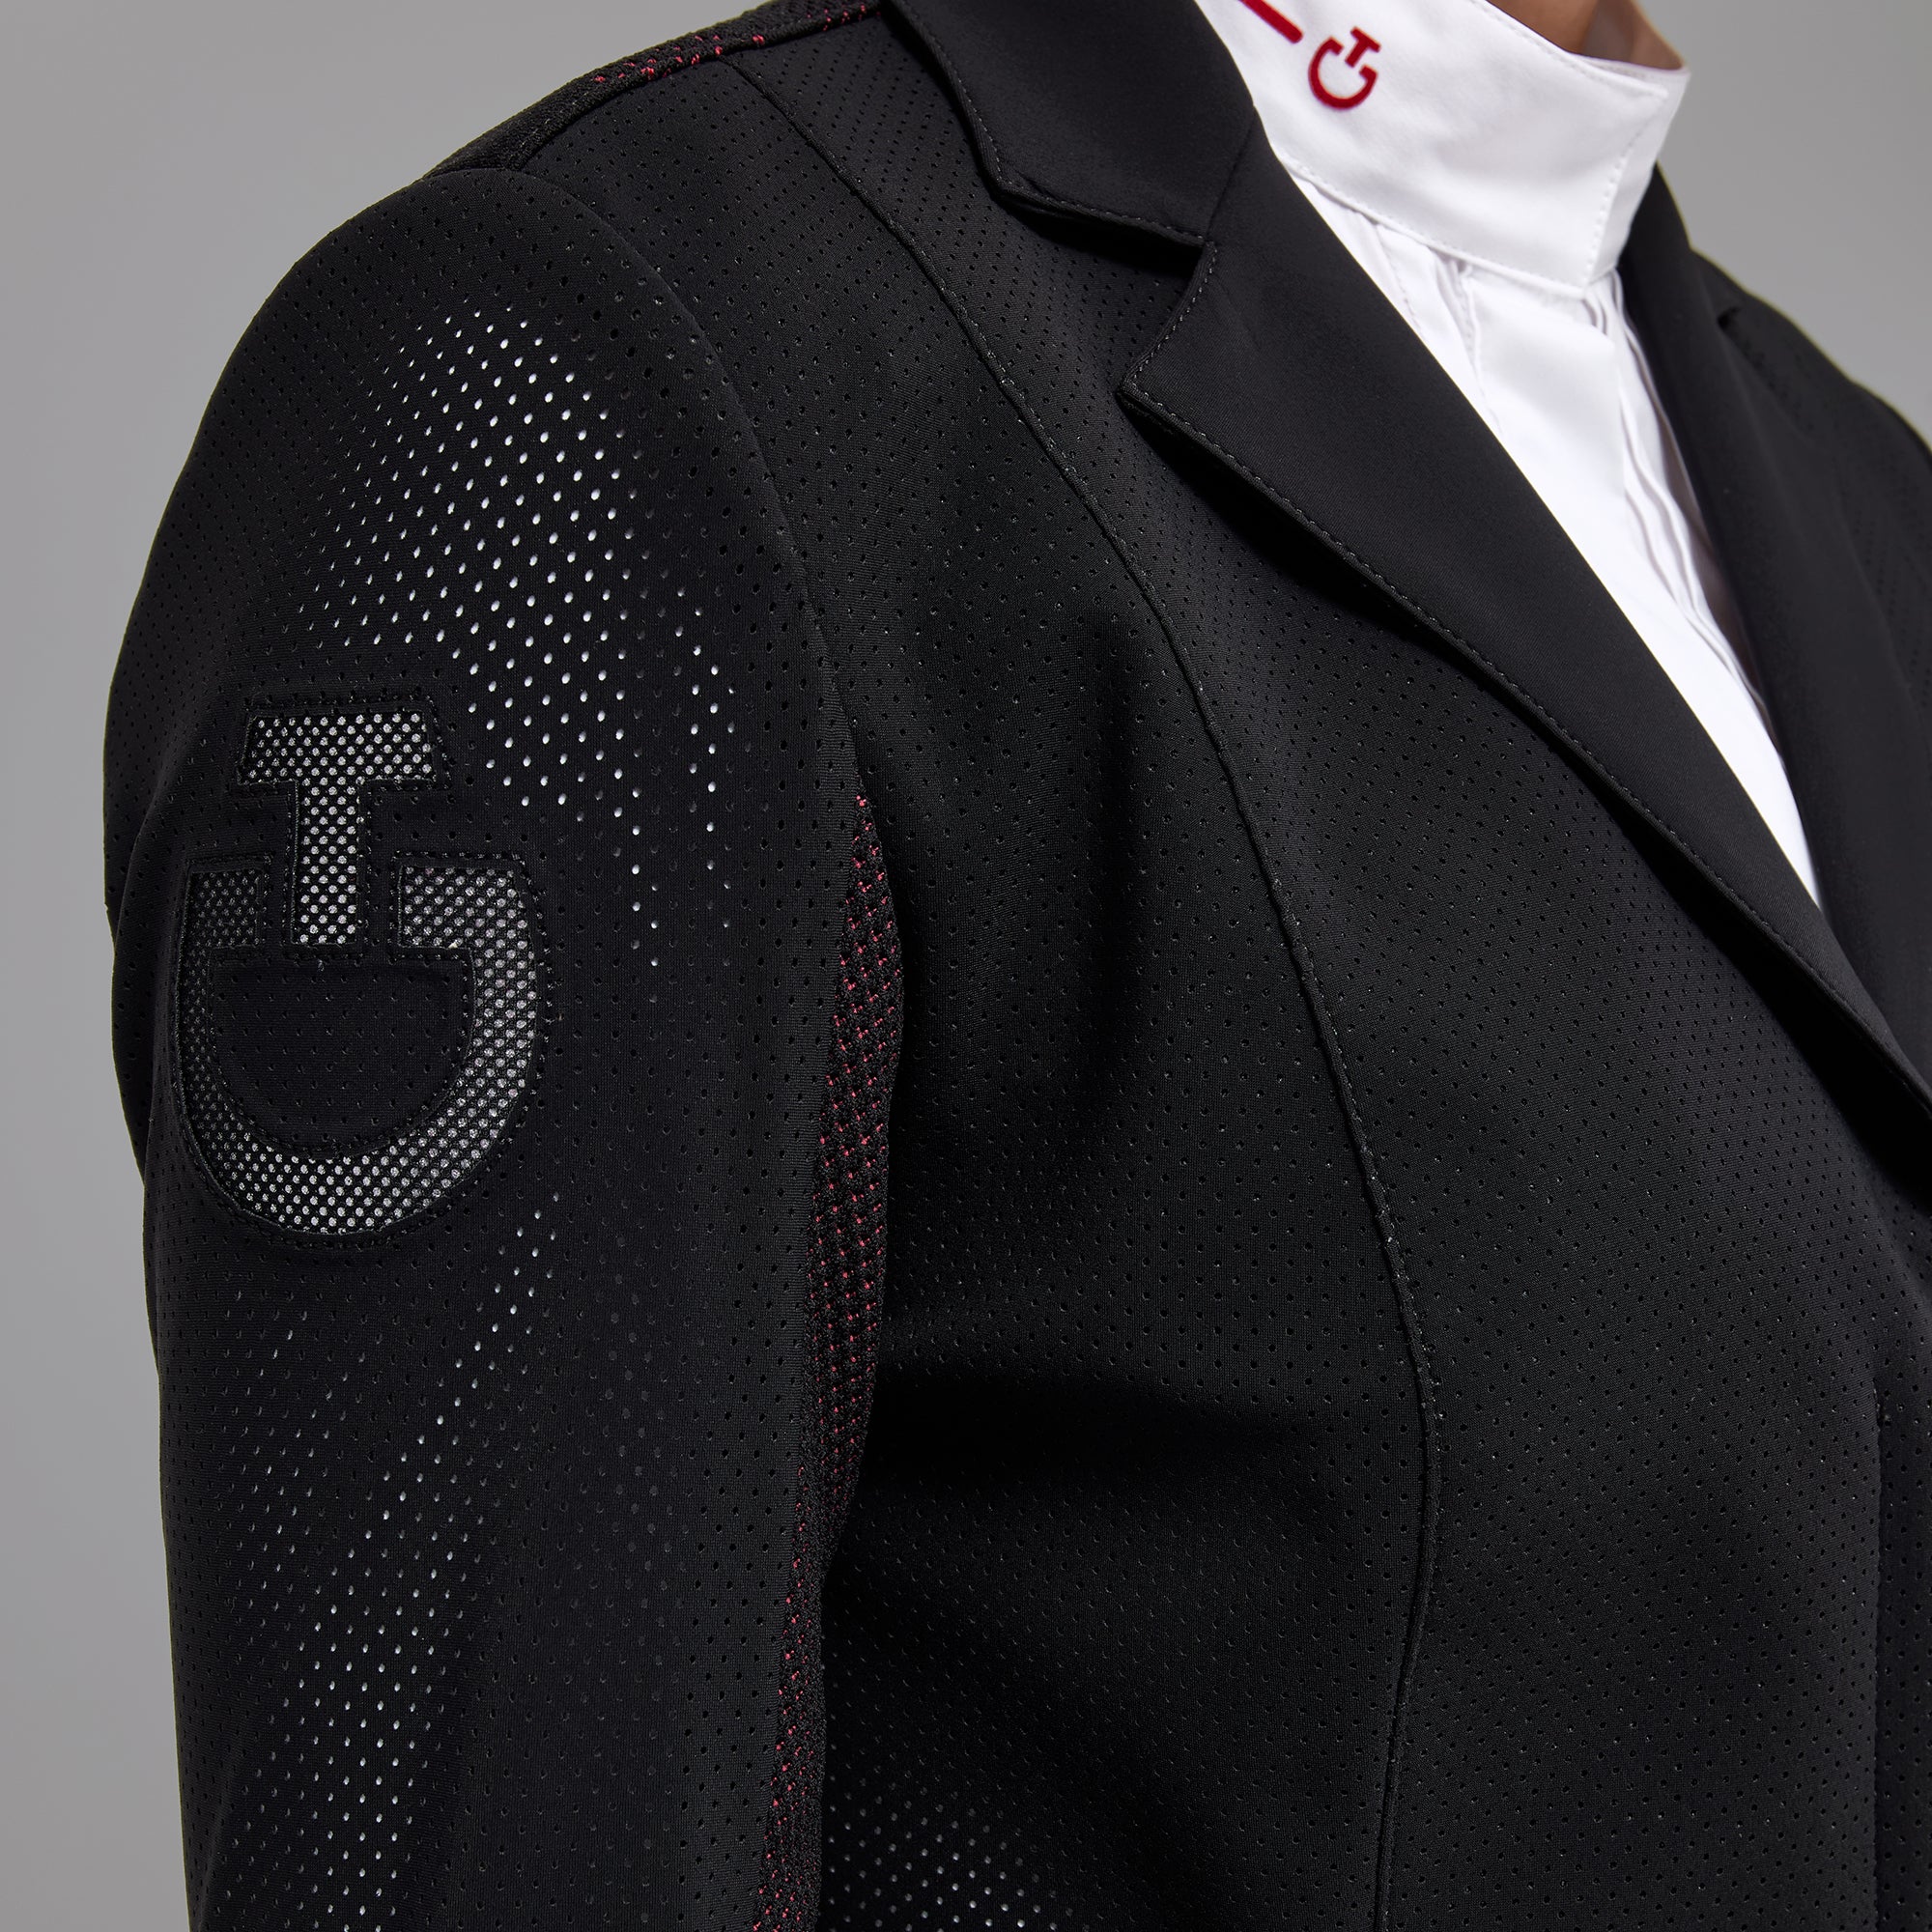 "Tech-Elite" - The lightweight, perforated women's jacket by Cavalleria Toscana